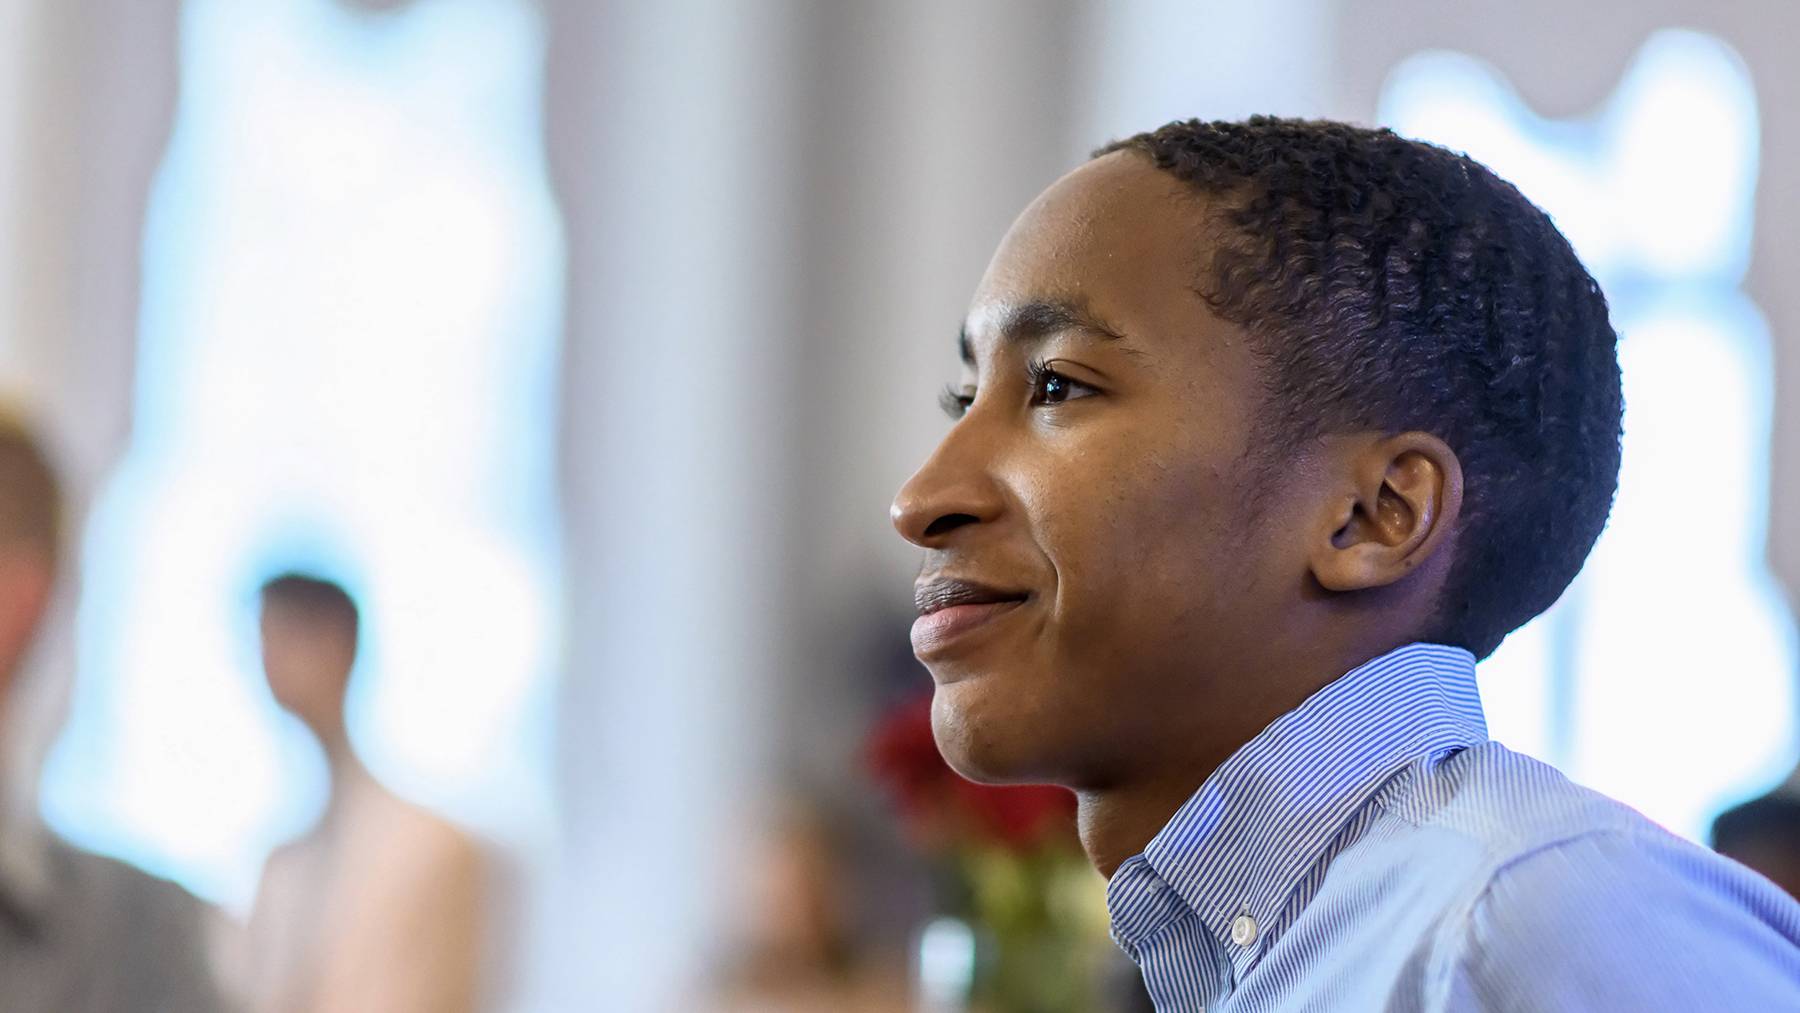 Young man smiles as he listens to a speaker during a recognition ceremony.